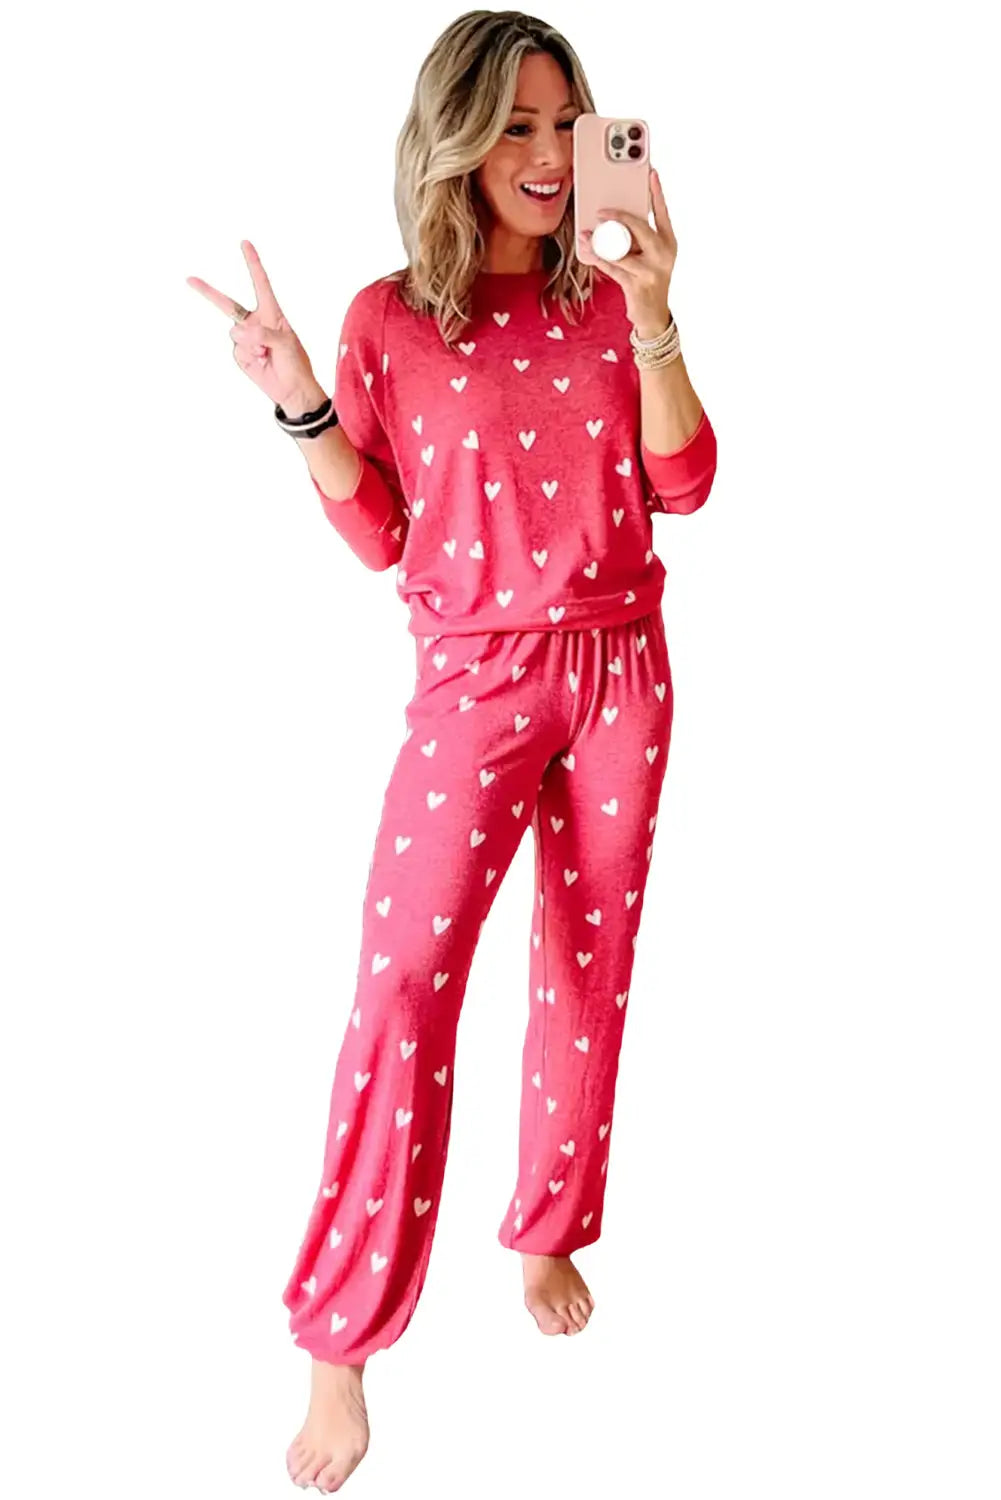 Fiery red valentines heart print pants set - sets